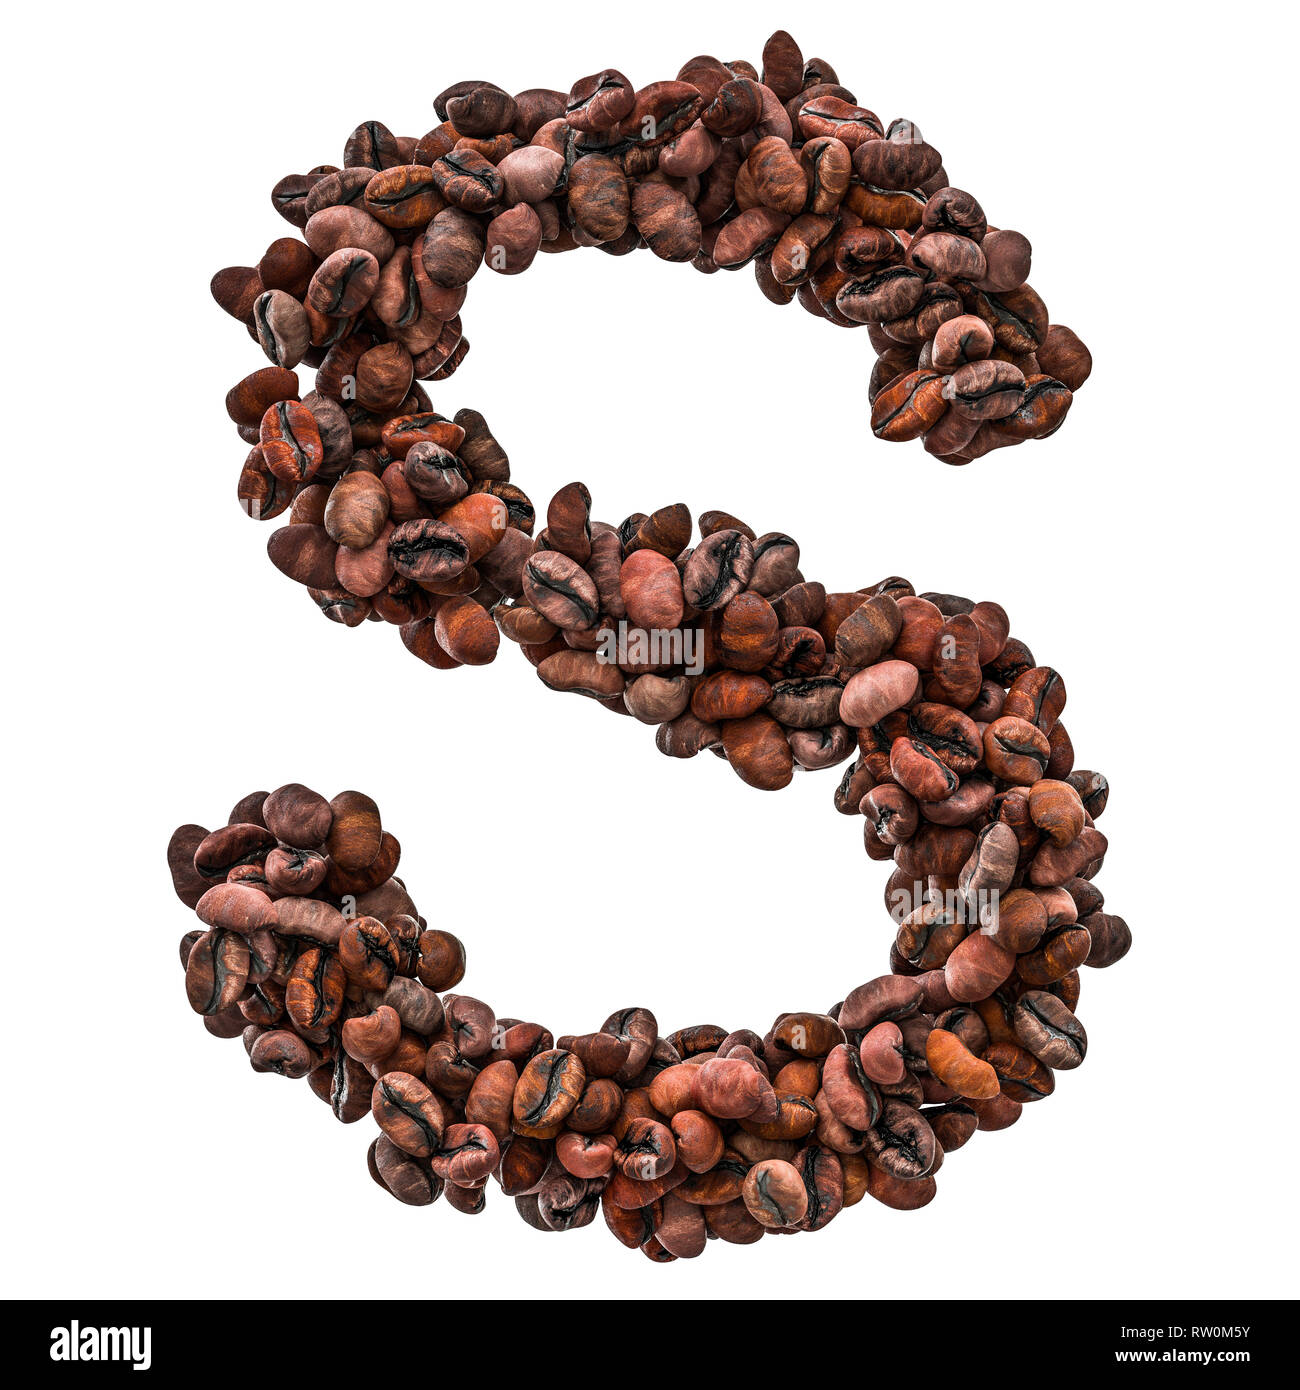 Alphabet letter S from roasted coffee beans, 3D rendering isolated on white background Stock Photo